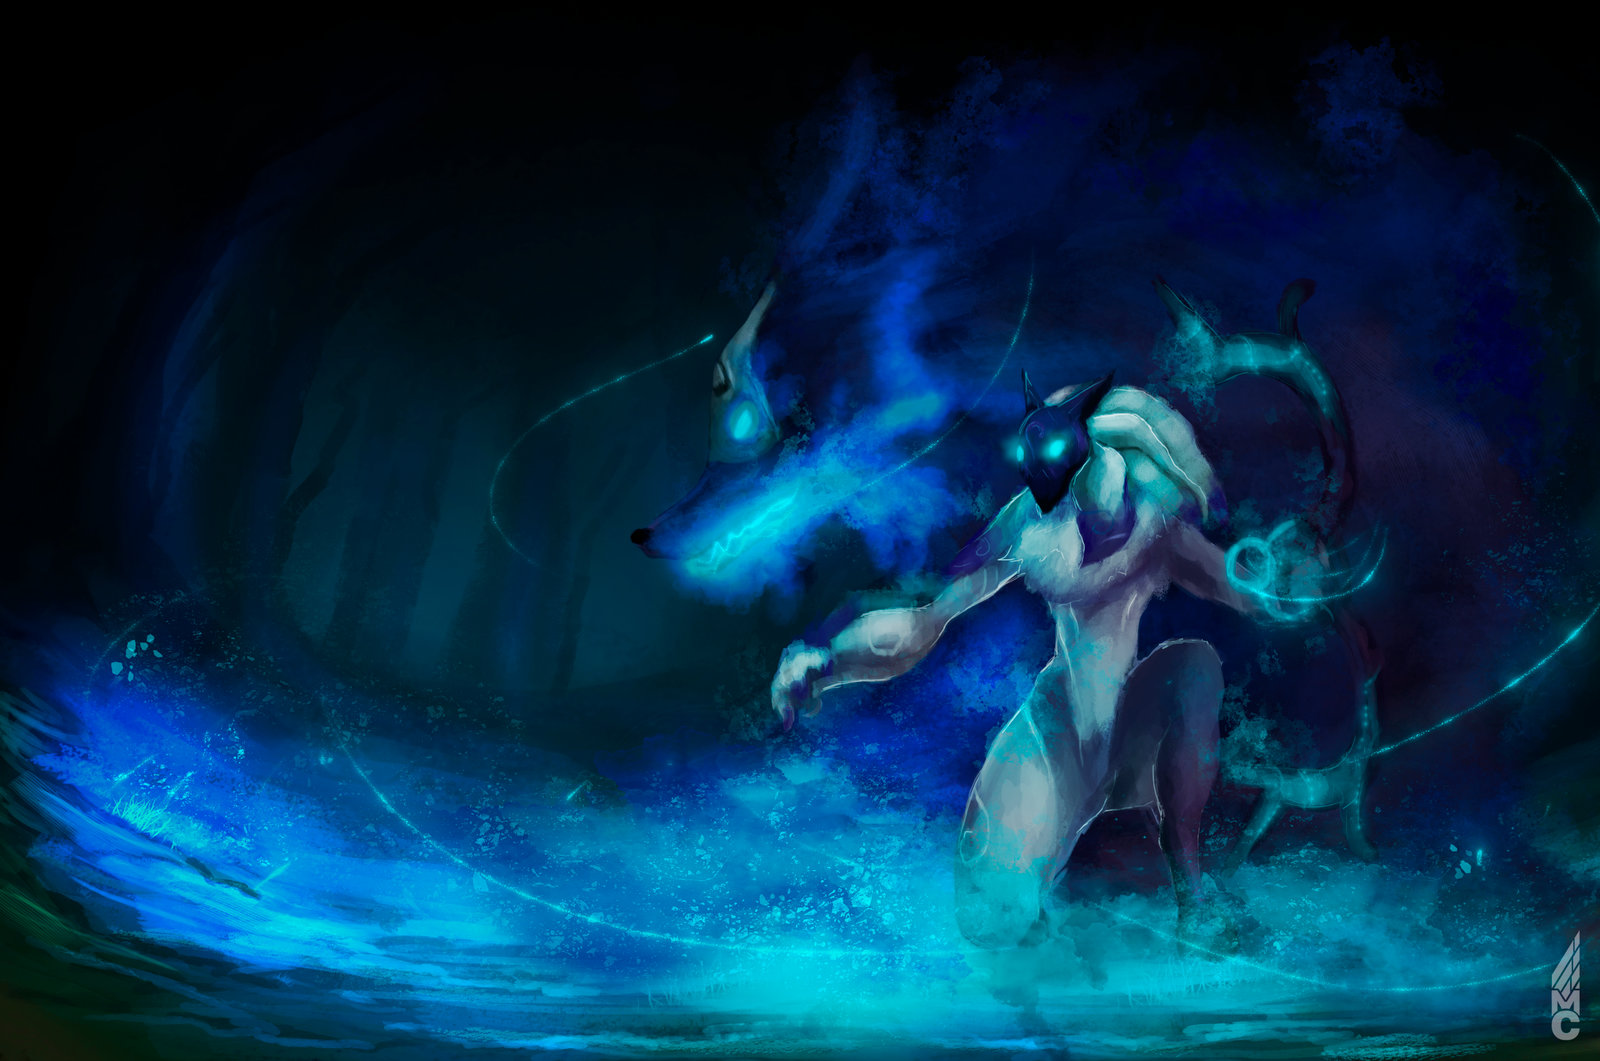 Kindred League of Legends Fan art by MCilustracion on